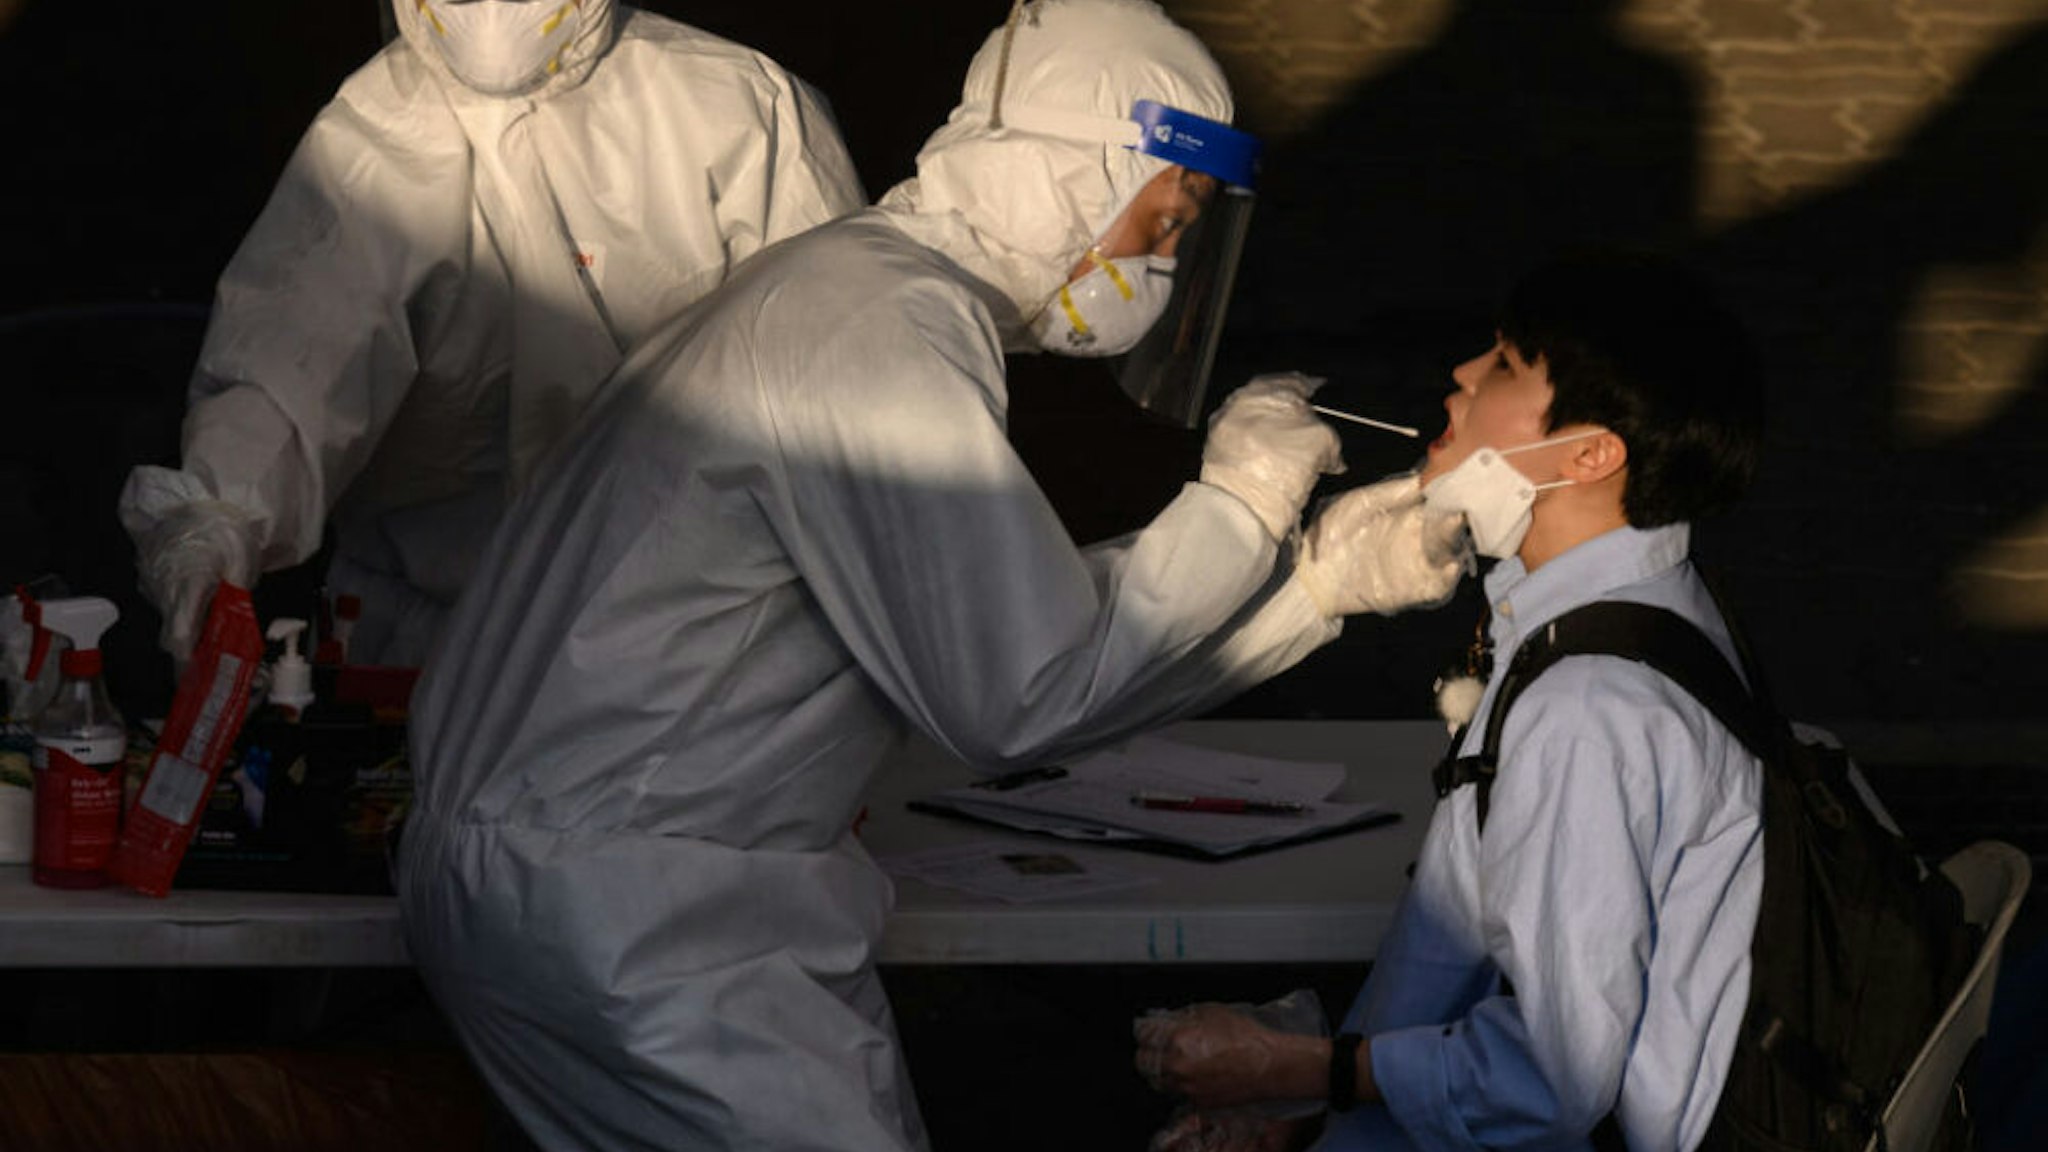 TOPSHOT - A health worker administers a swab at a temporary COVID-19 novel coronavirus testing centre in Bucheon, south of Seoul, on May 27, 2020. - South Korea reported its biggest jump in coronavirus infections in seven weeks on May 27, driven by a fresh cluster at an e-commerce warehouse on Seoul's outskirts, as millions more pupils went back to school.